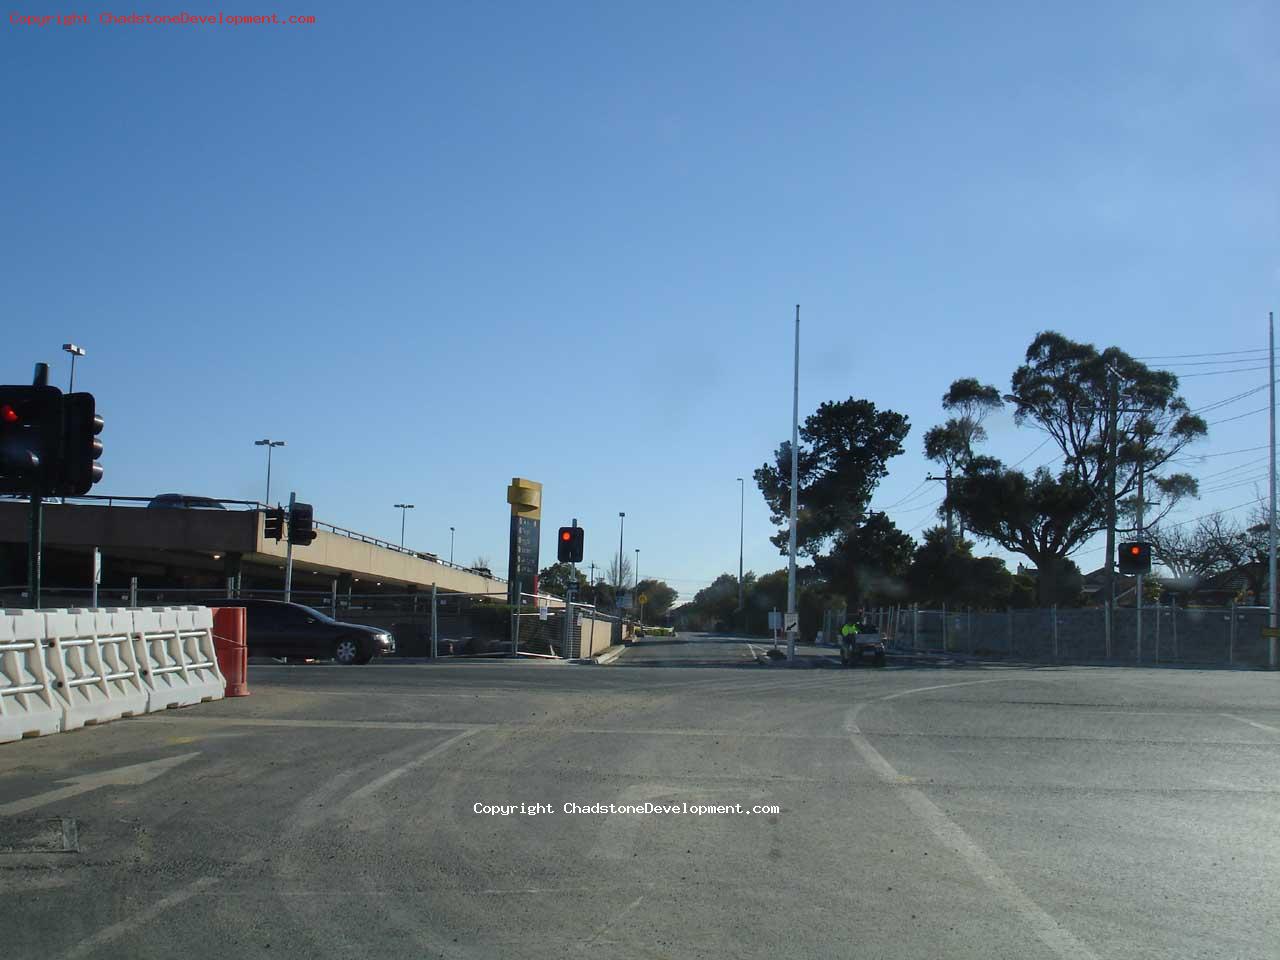 Intersection at the exit of the perimiter road - Chadstone Development Discussions